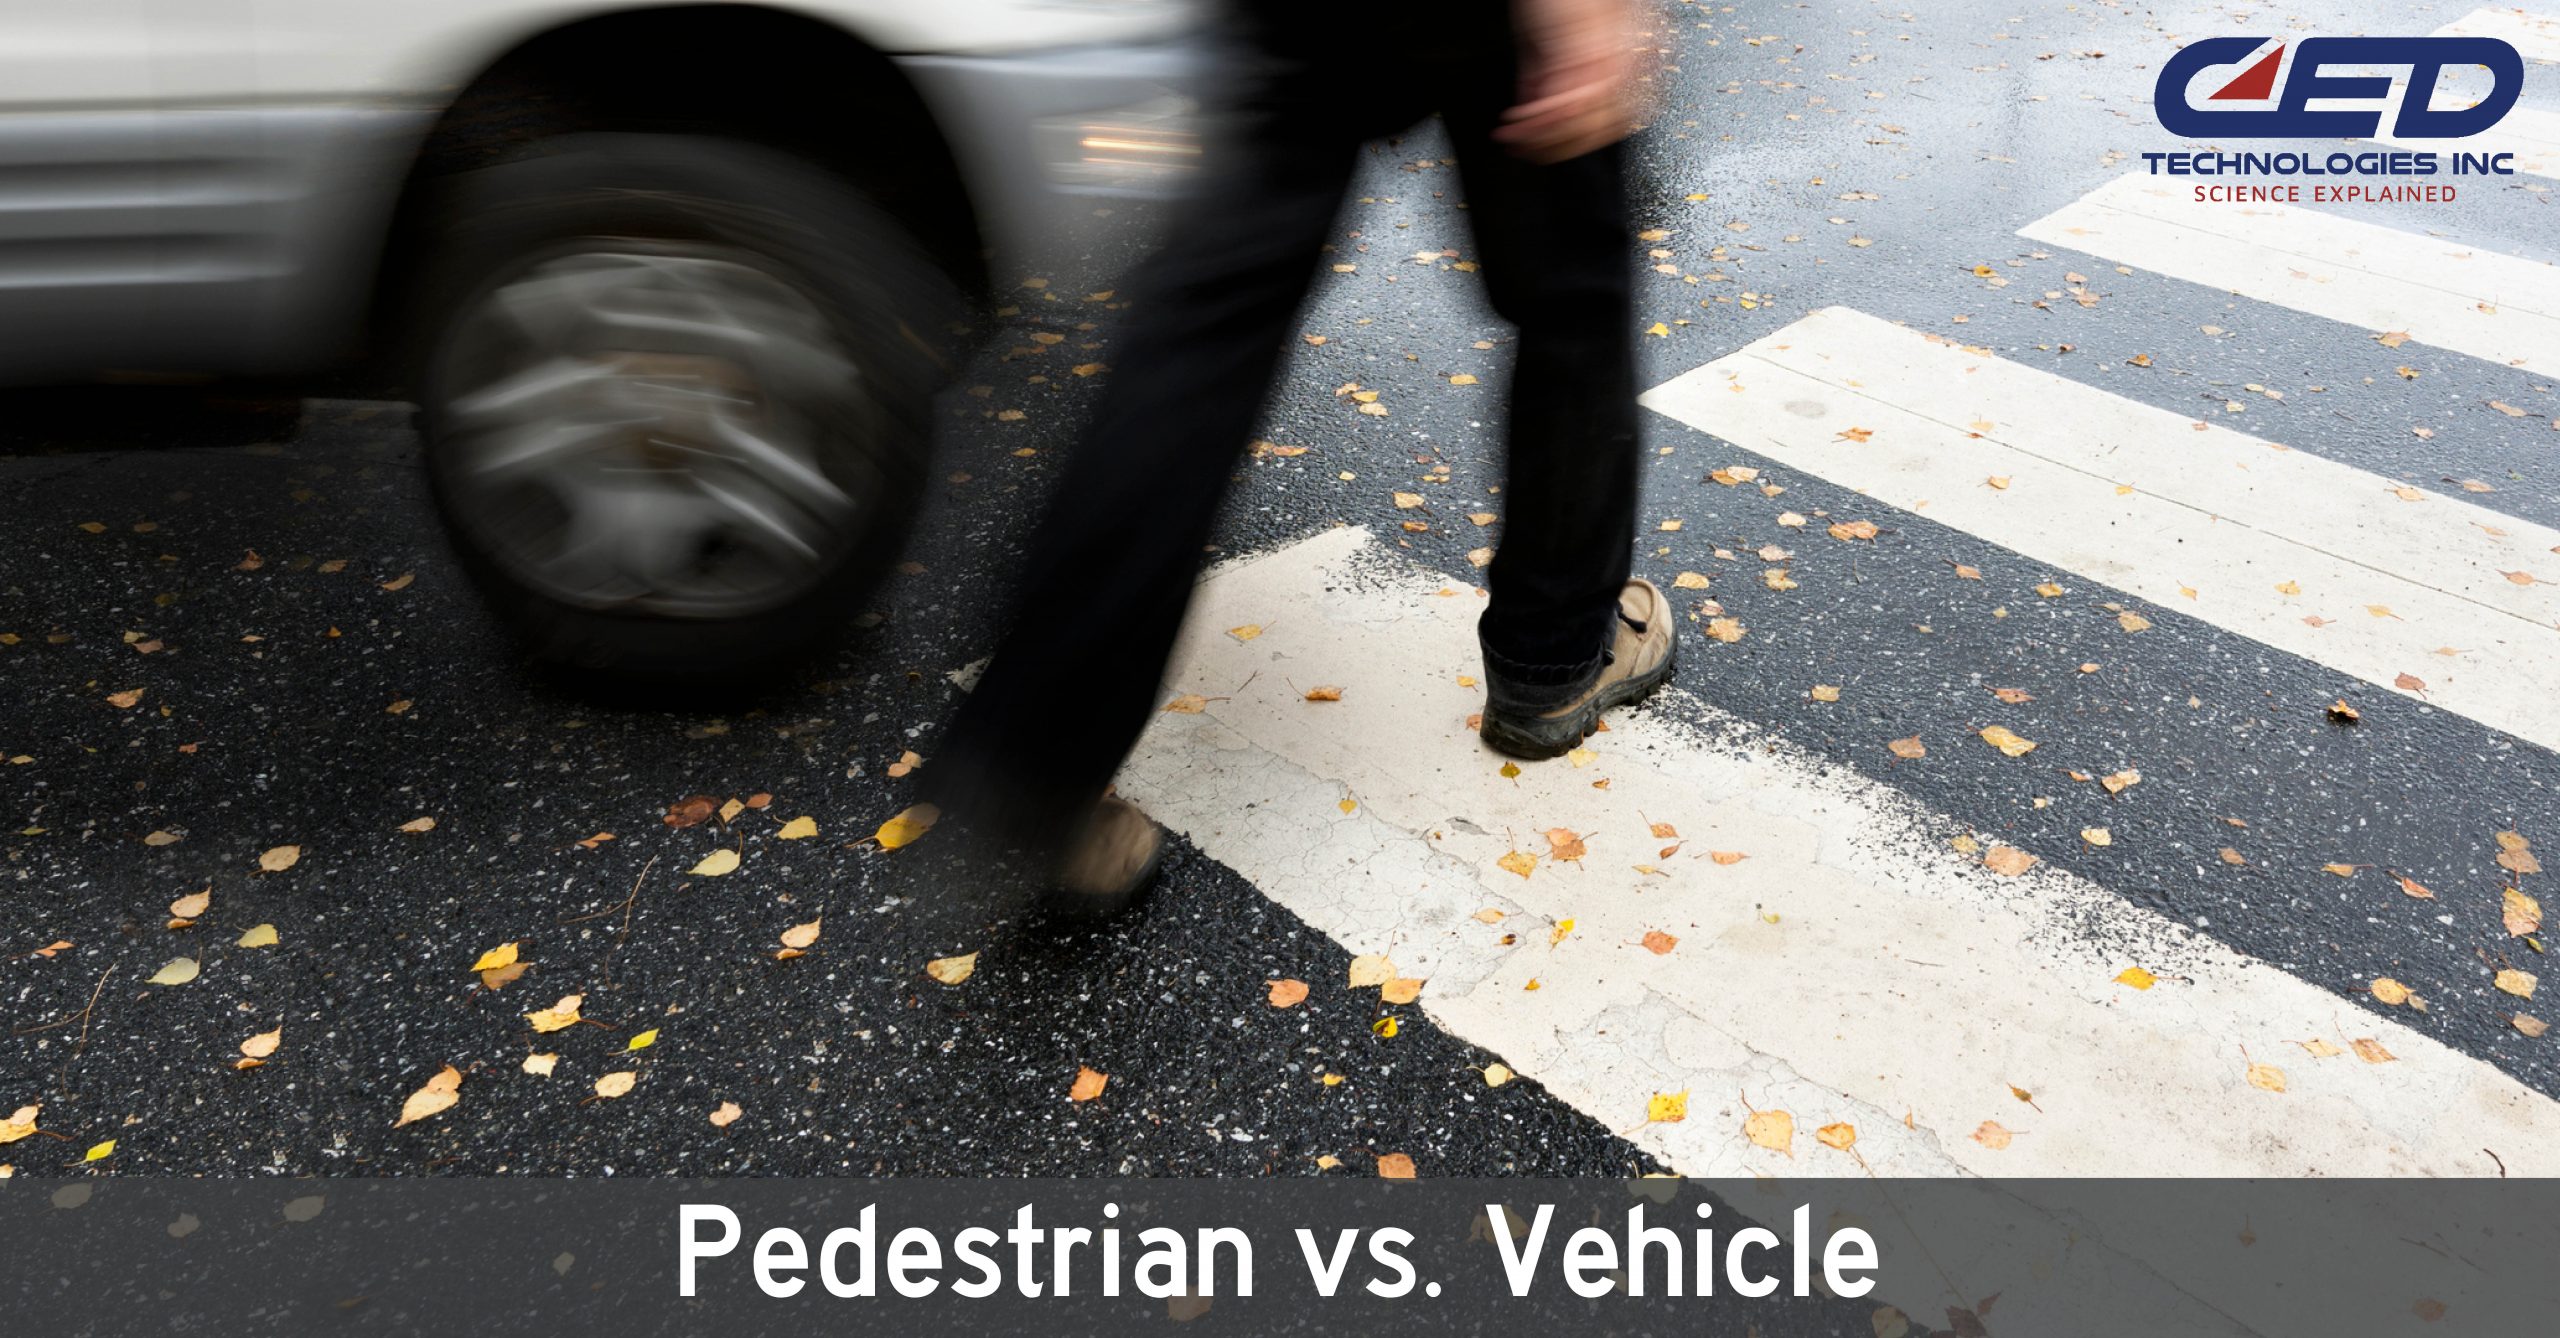 Pedestrian vs. Vehicle: Impacts on the Body